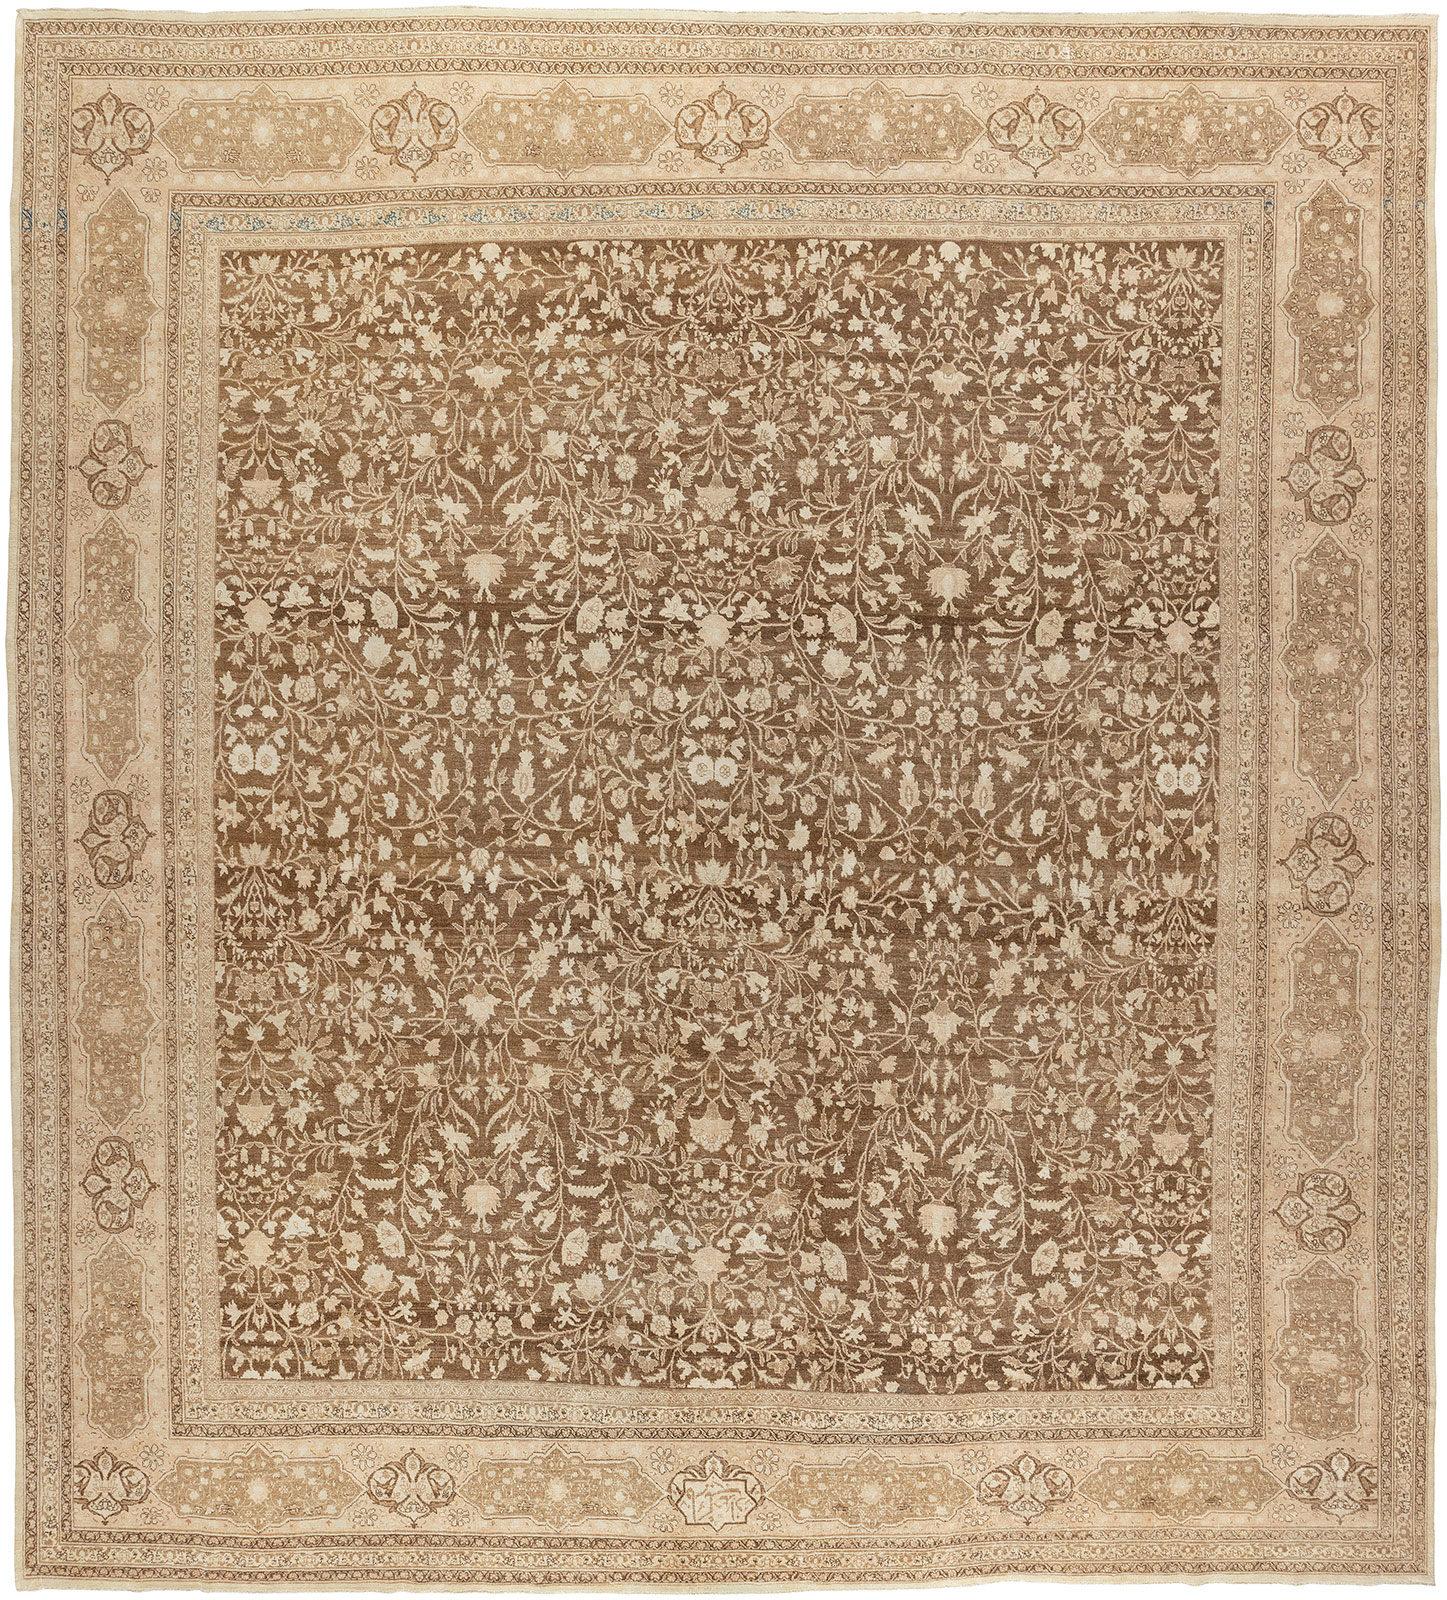 Rare large square size early 20th century authentic Persian Tabriz featuring an all over floral pattern in brown and ivory

circa 1920, measures: 13' x 14'4